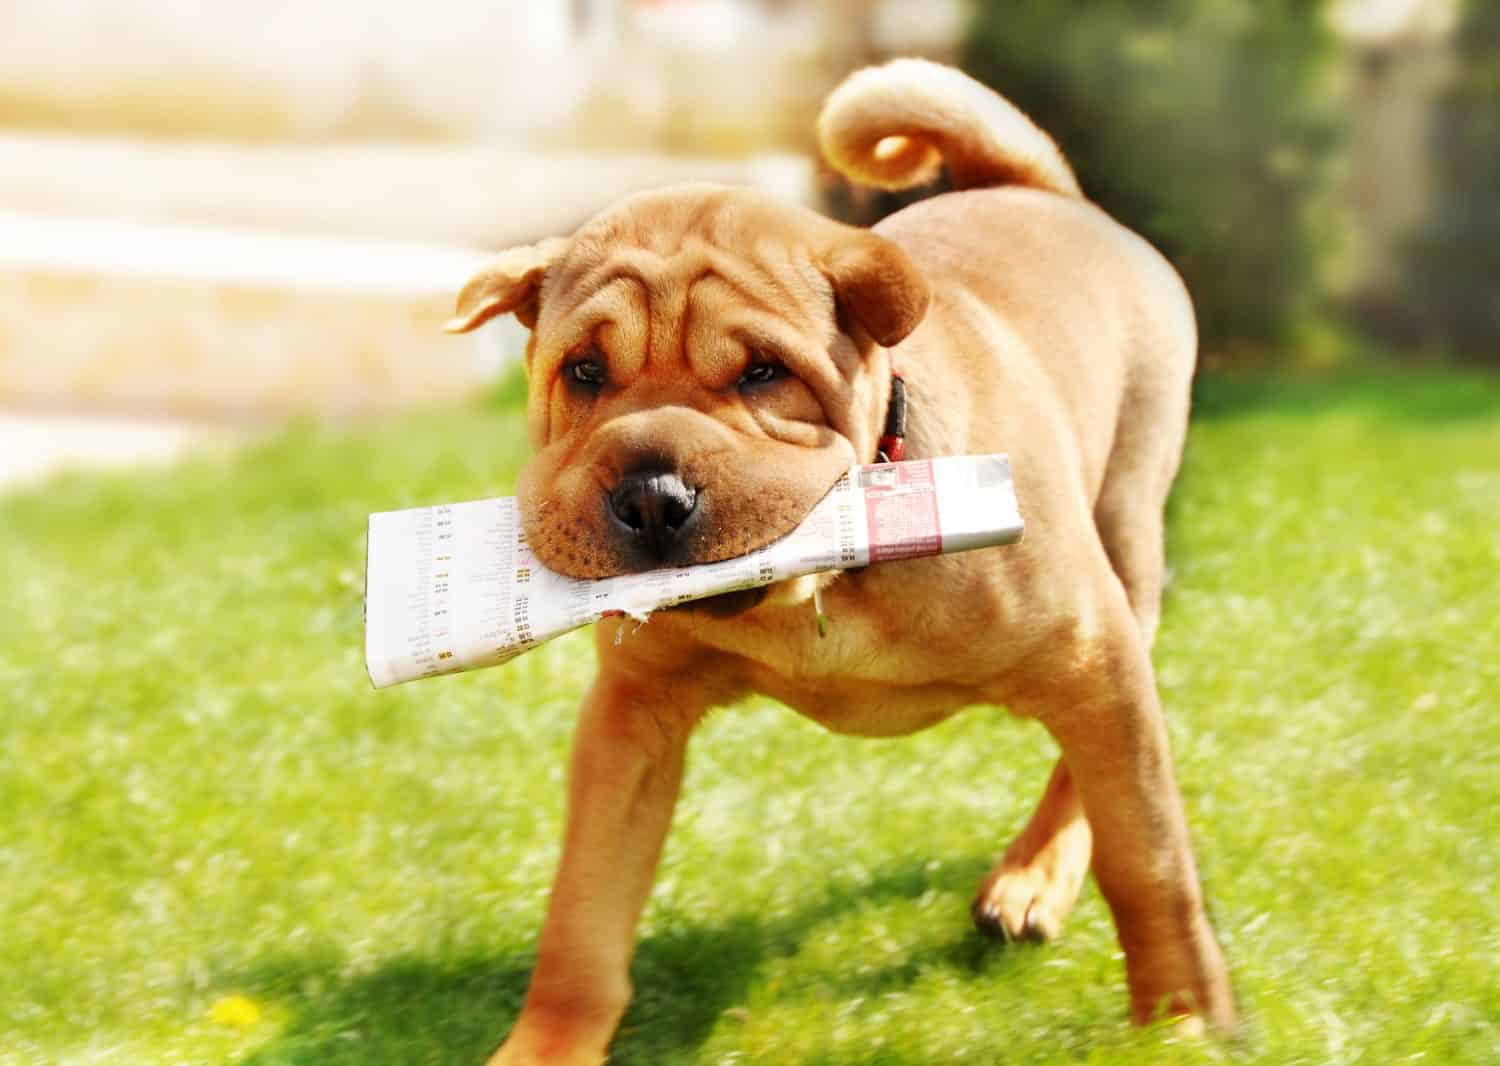 adorable shar pei dog carrying newspaper over green natural background outdoor